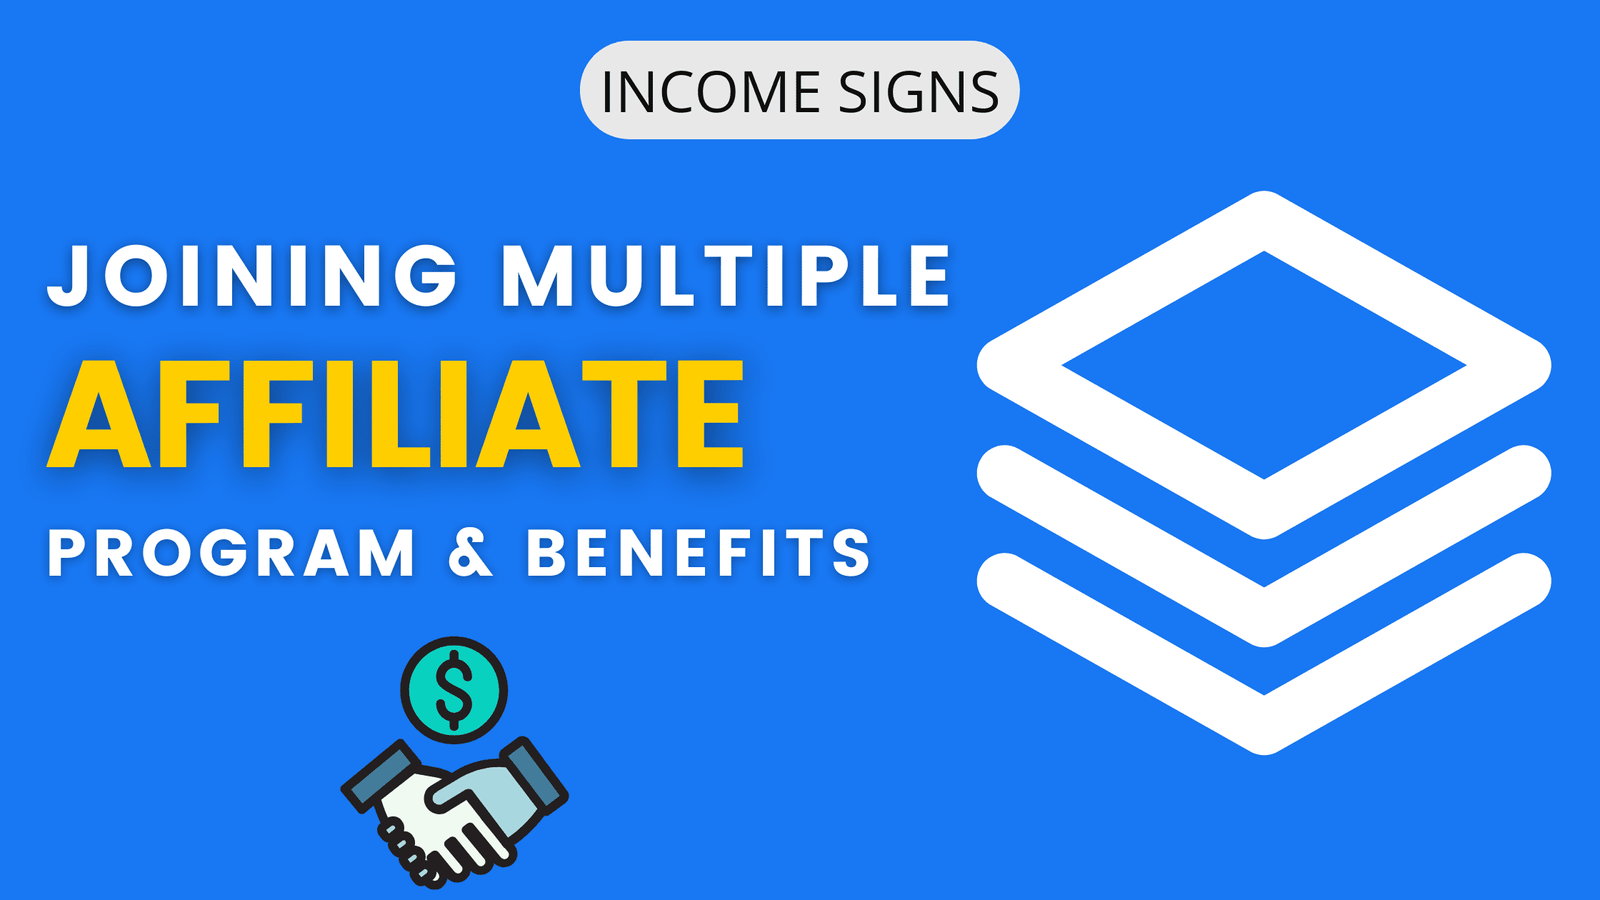 Joining Multiple Affiliate Programs as An Affiliate Marketer